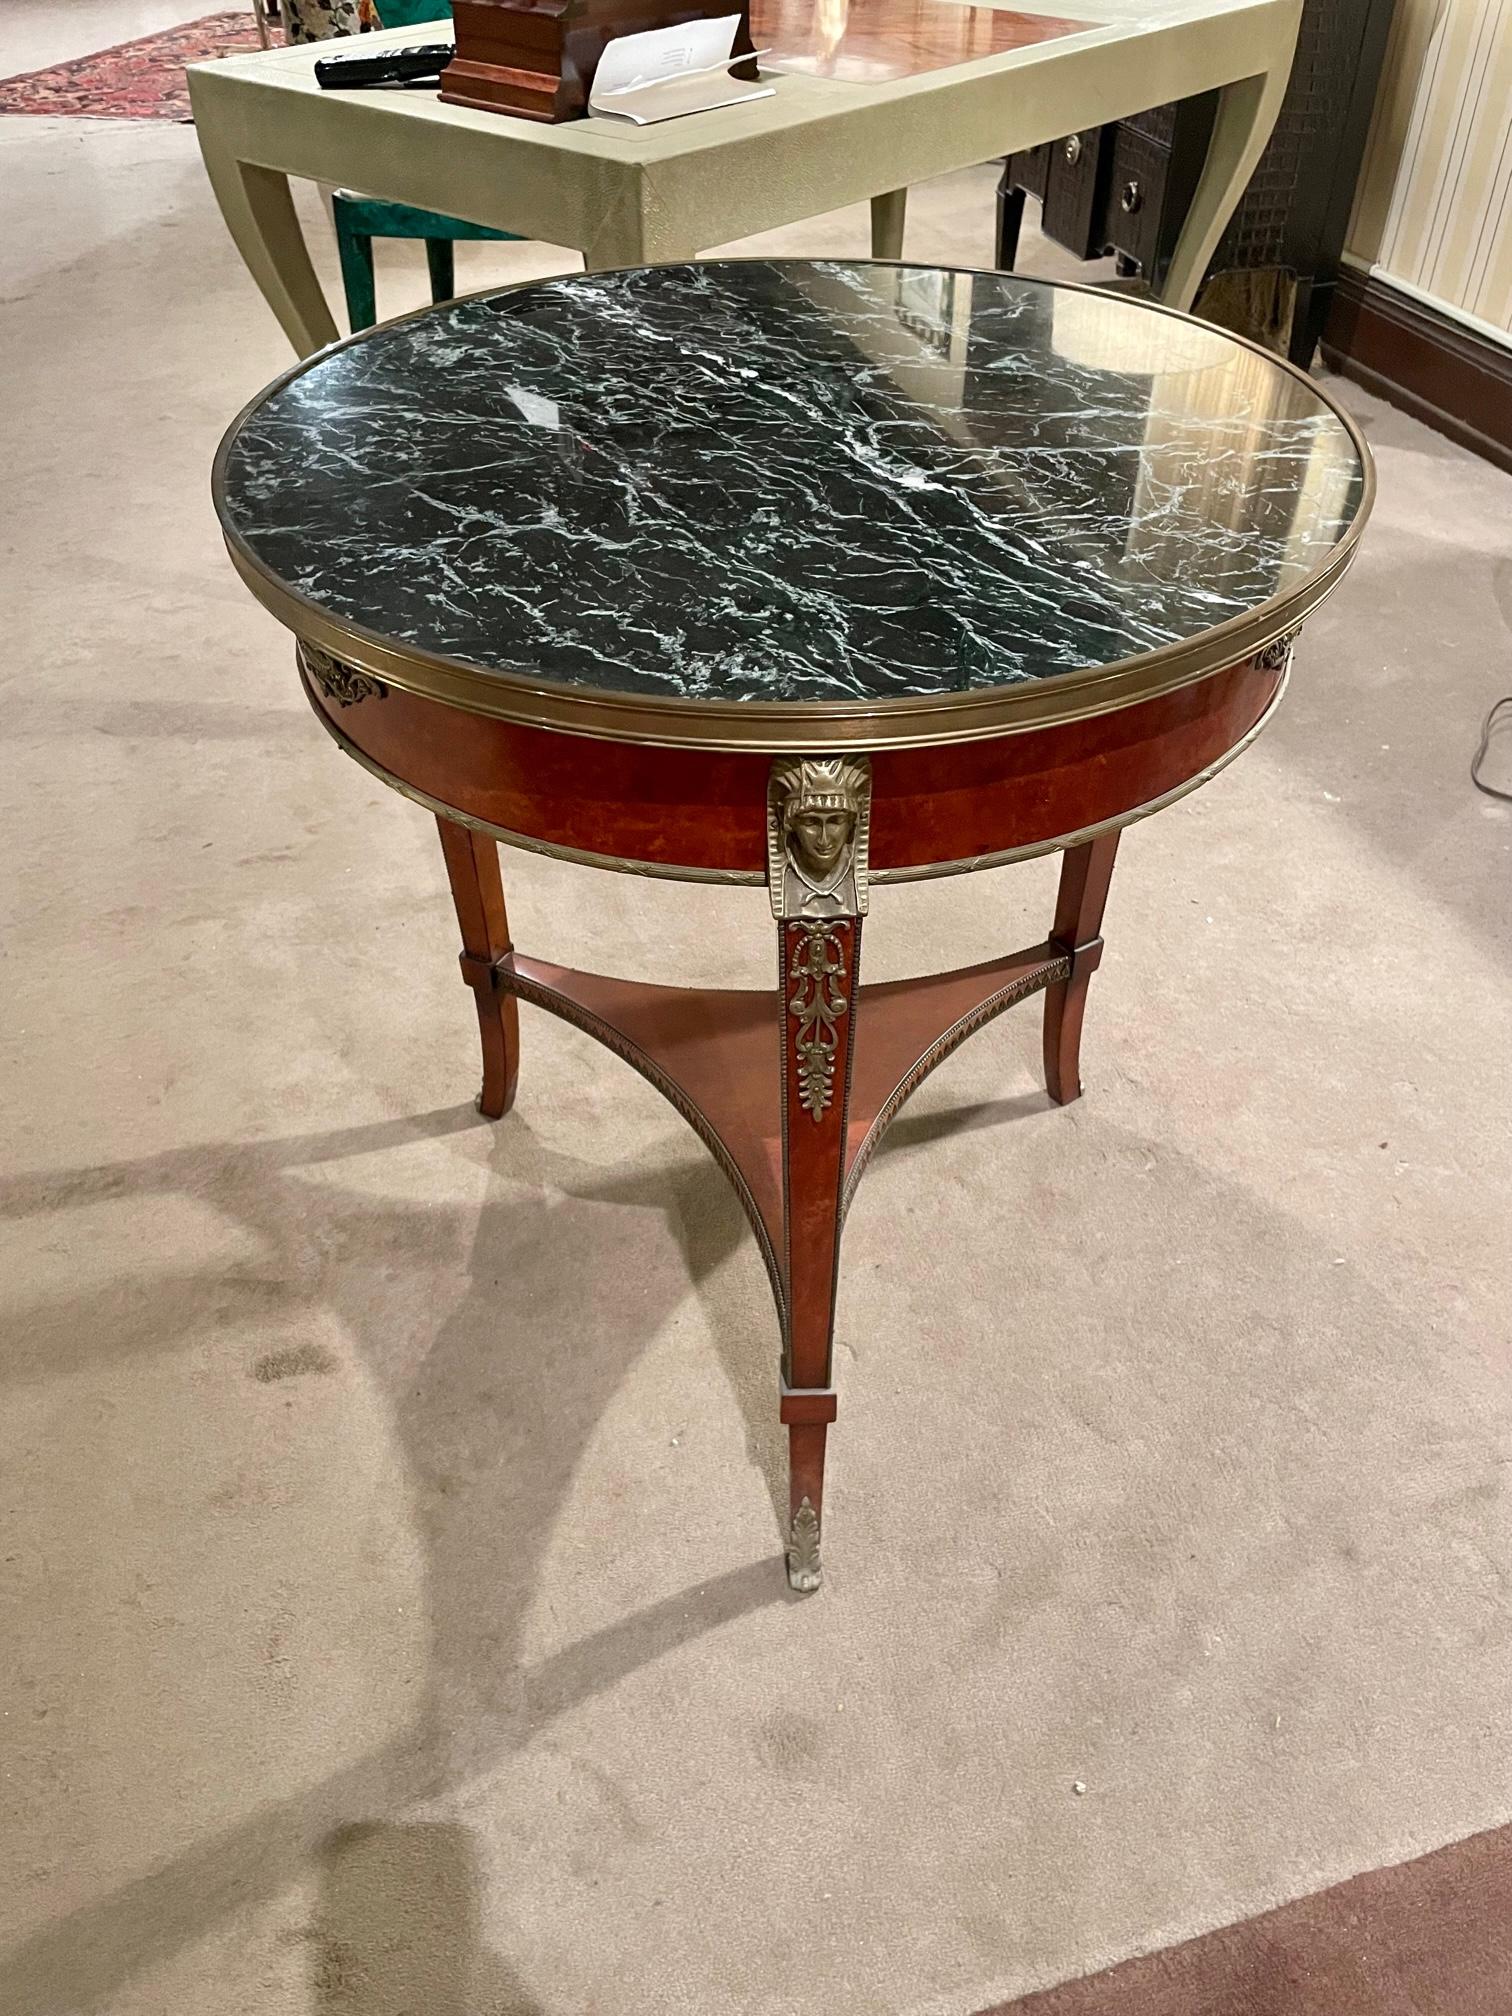 This vintage Neoclassical style gueridon was made by John Widdicomb Furniture Company in Grand Rapids, Michigan. It was purchased new by our company as part of a purchase for our showroom inventory and has been variously on our showroom floor and in